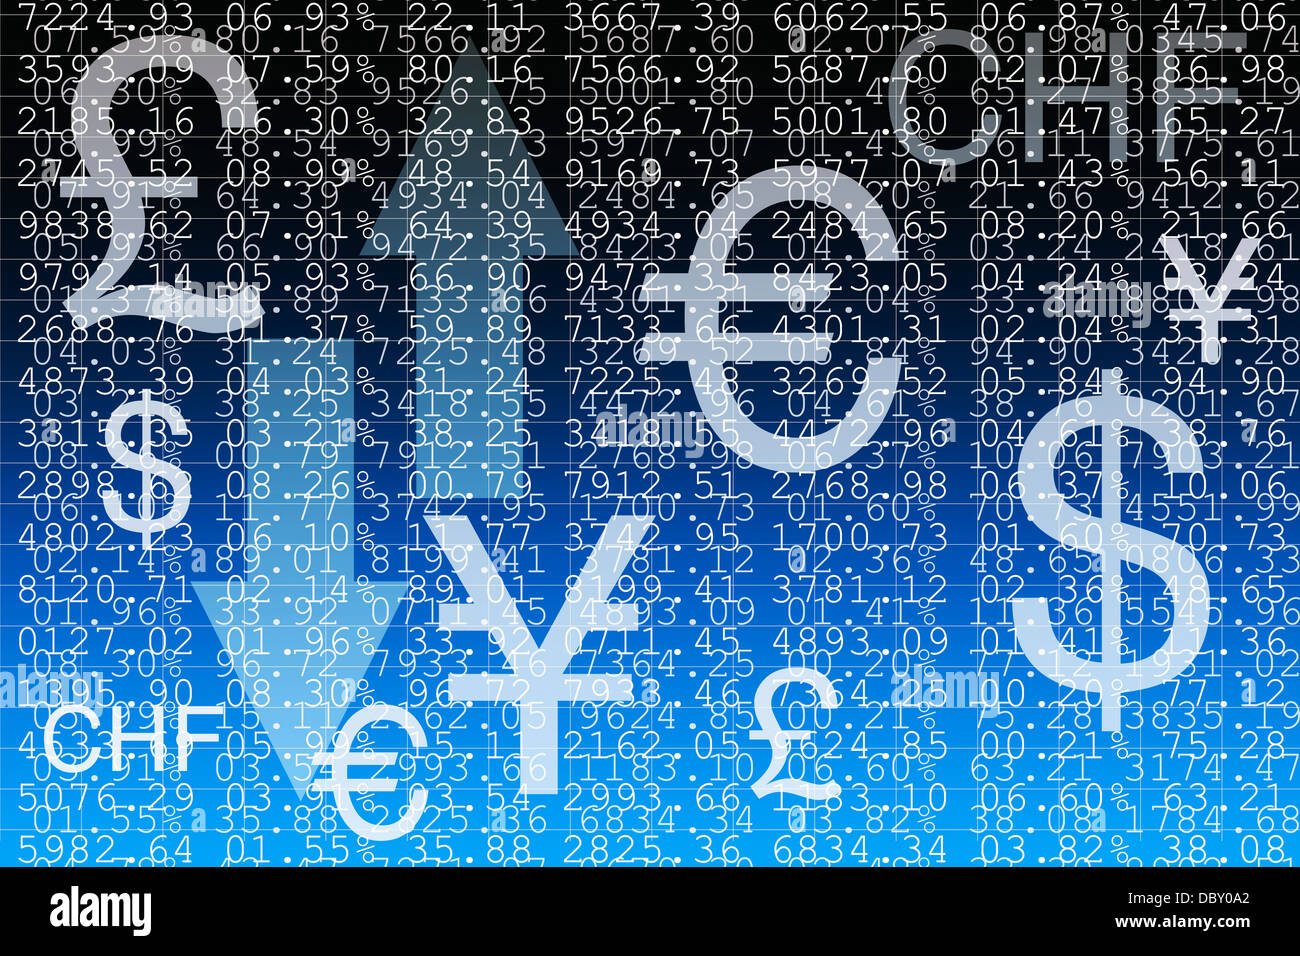 graphic illustration representing markets, currencies and exchanges Stock Photo